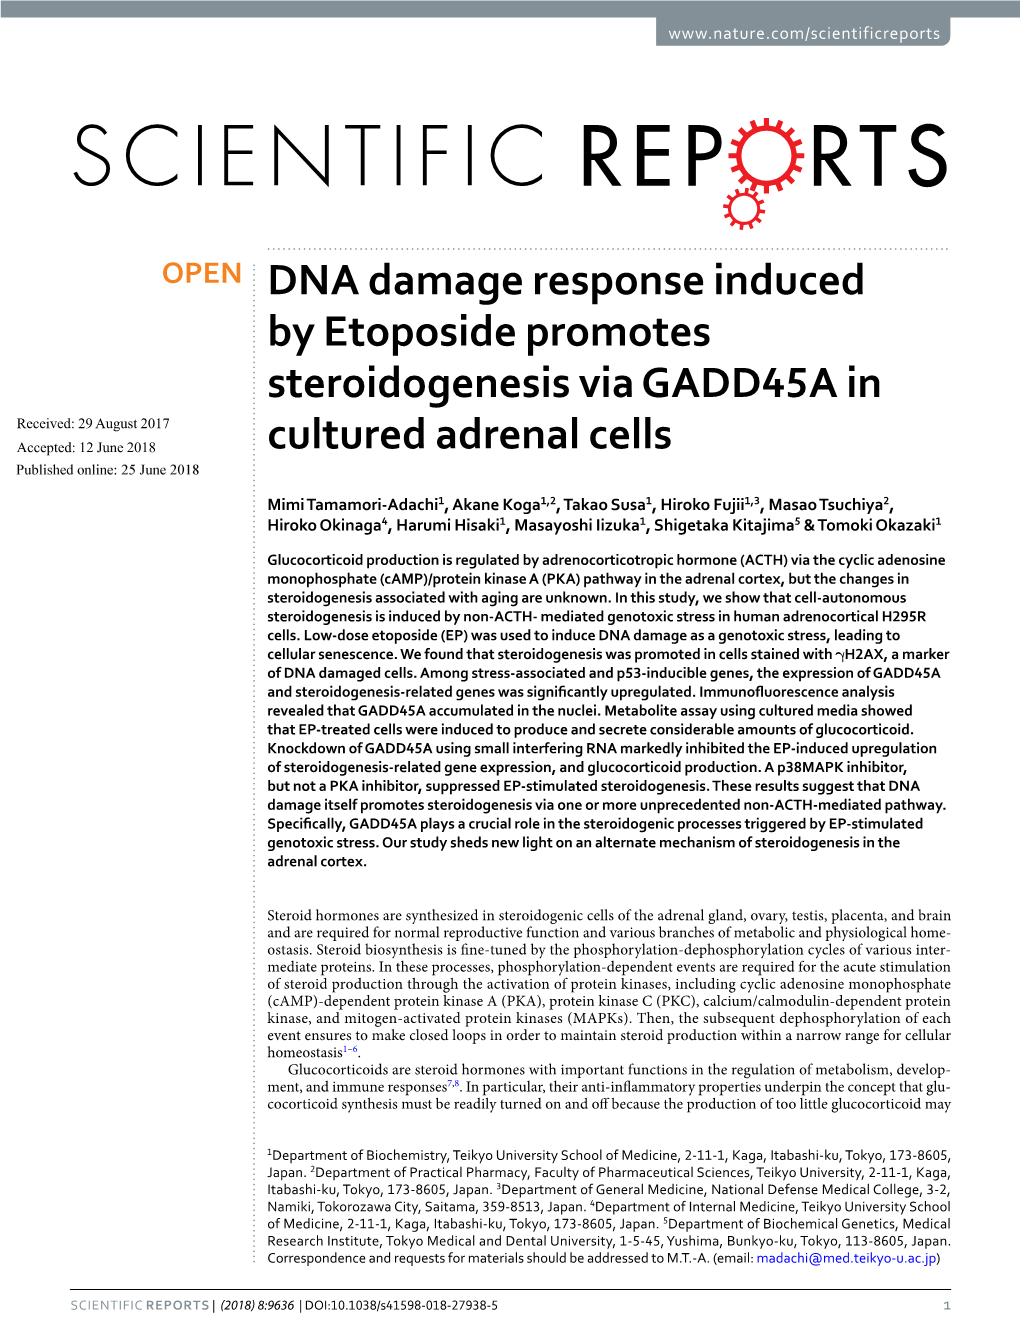 DNA Damage Response Induced by Etoposide Promotes Steroidogenesis Via GADD45A in Cultured Adrenal Cells